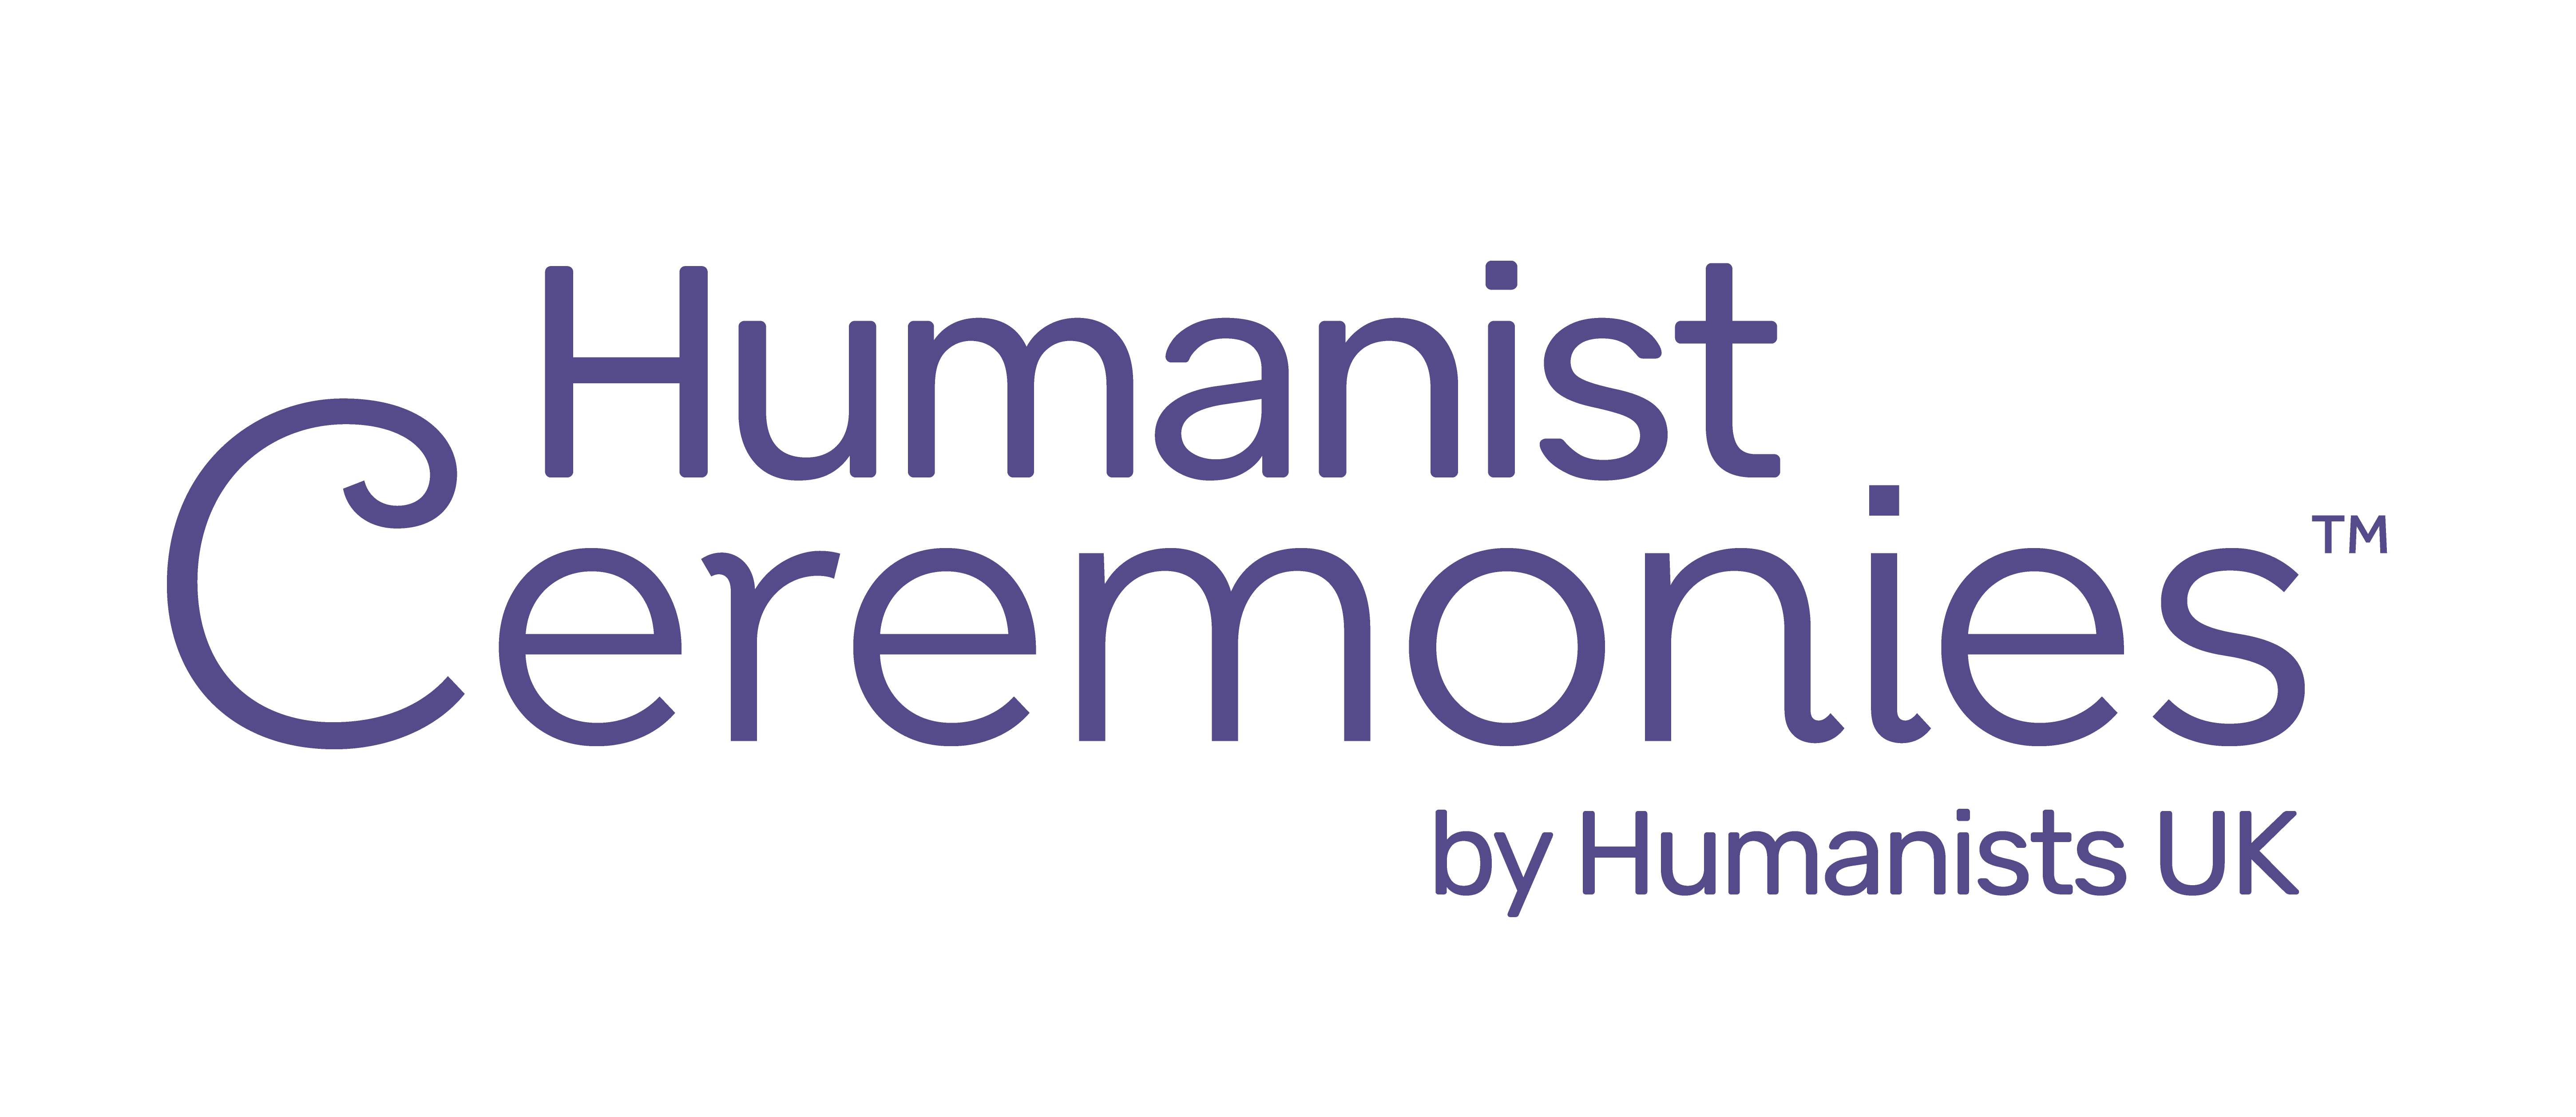 Humanist Ceremonies by Humanists UK